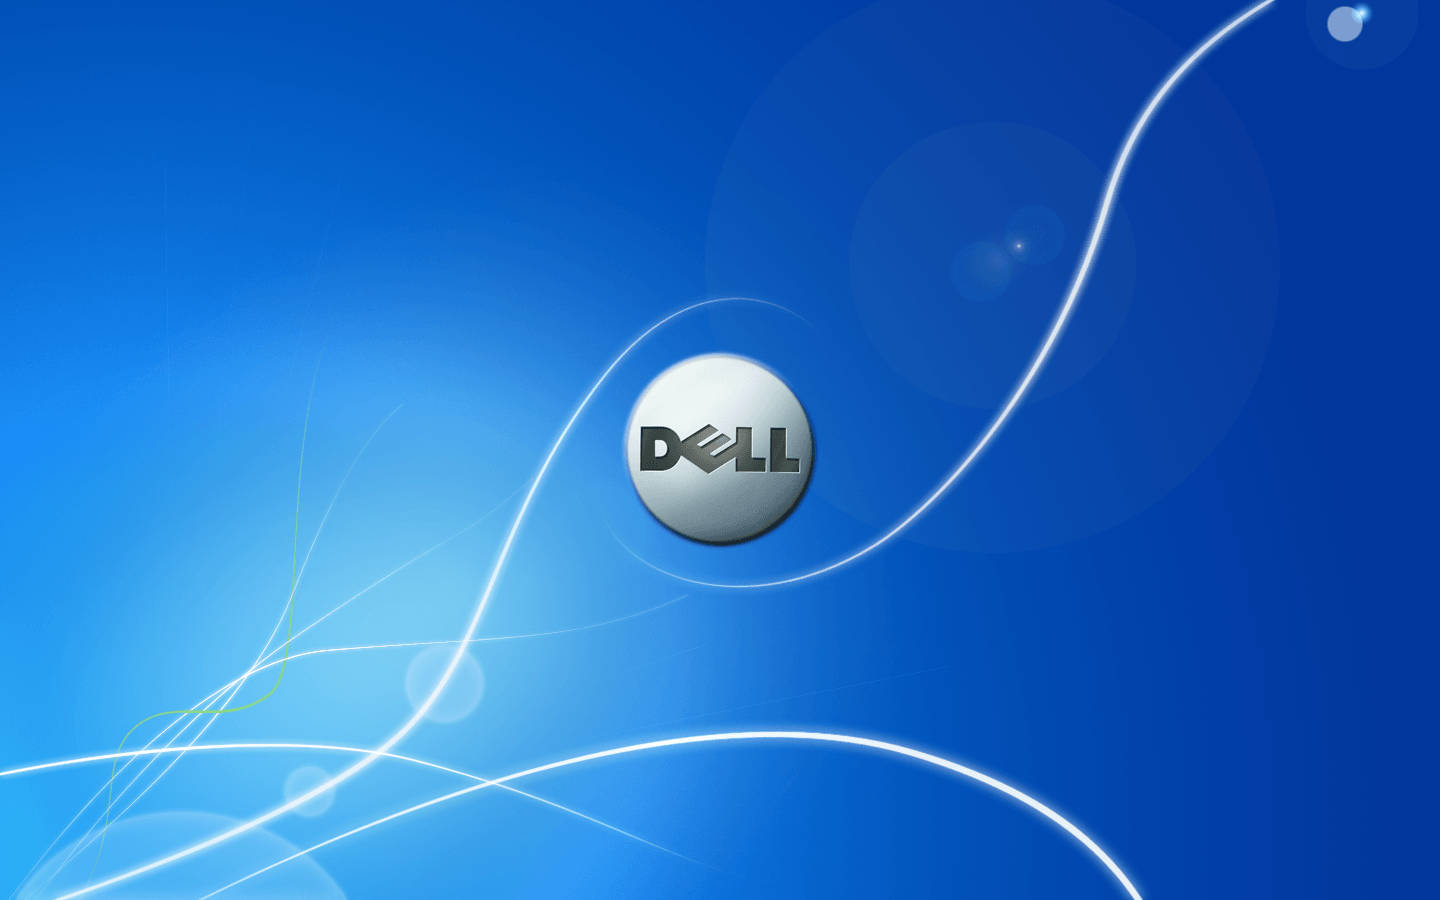 Dell Trademark On Blue Background